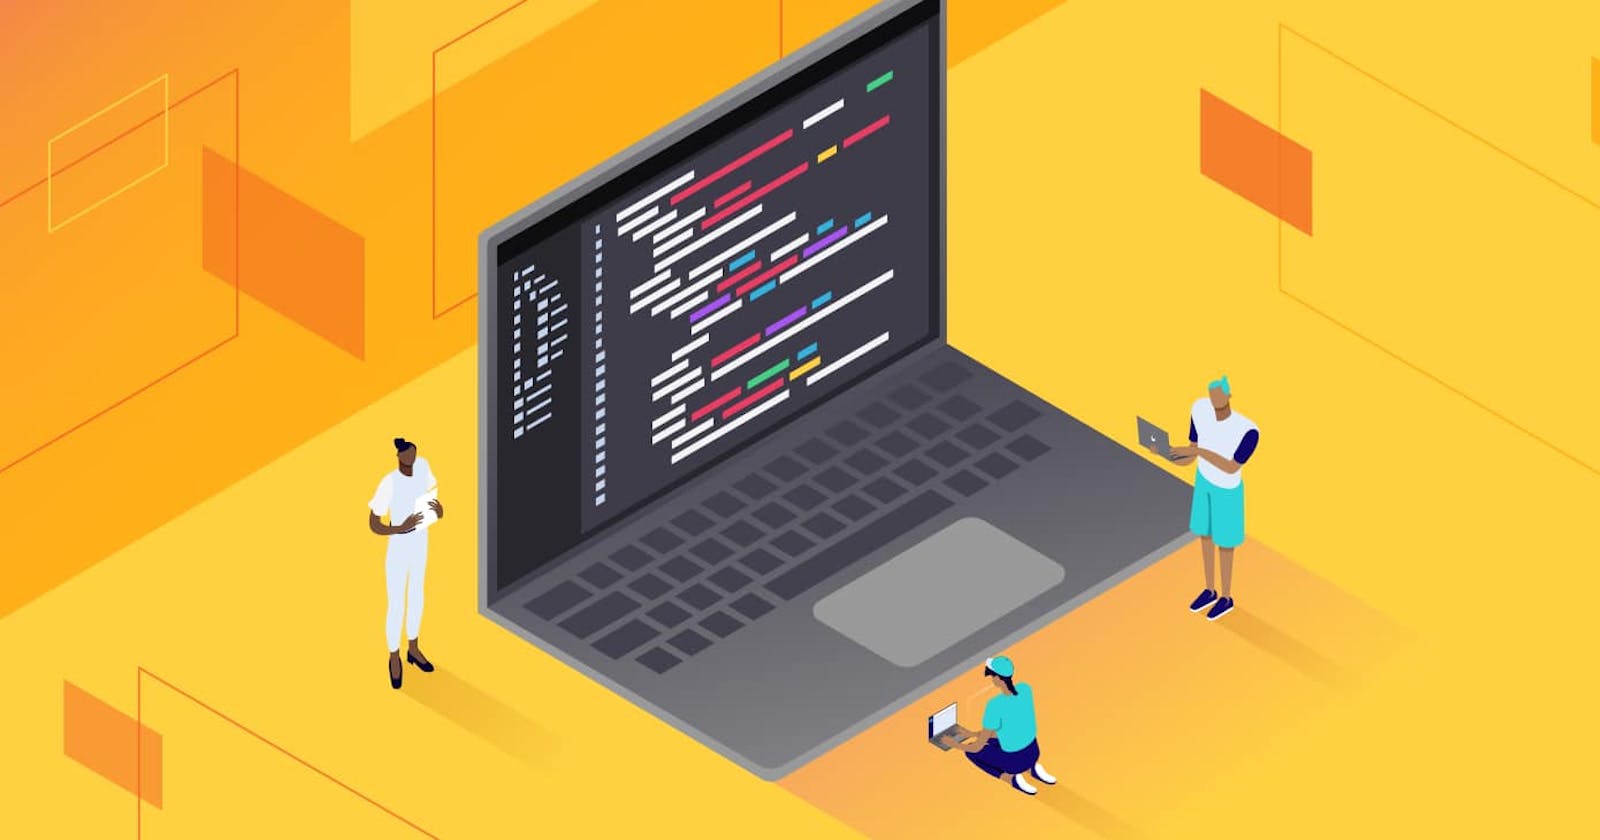 Learn How to Use Sublime Text: A Quick Overview